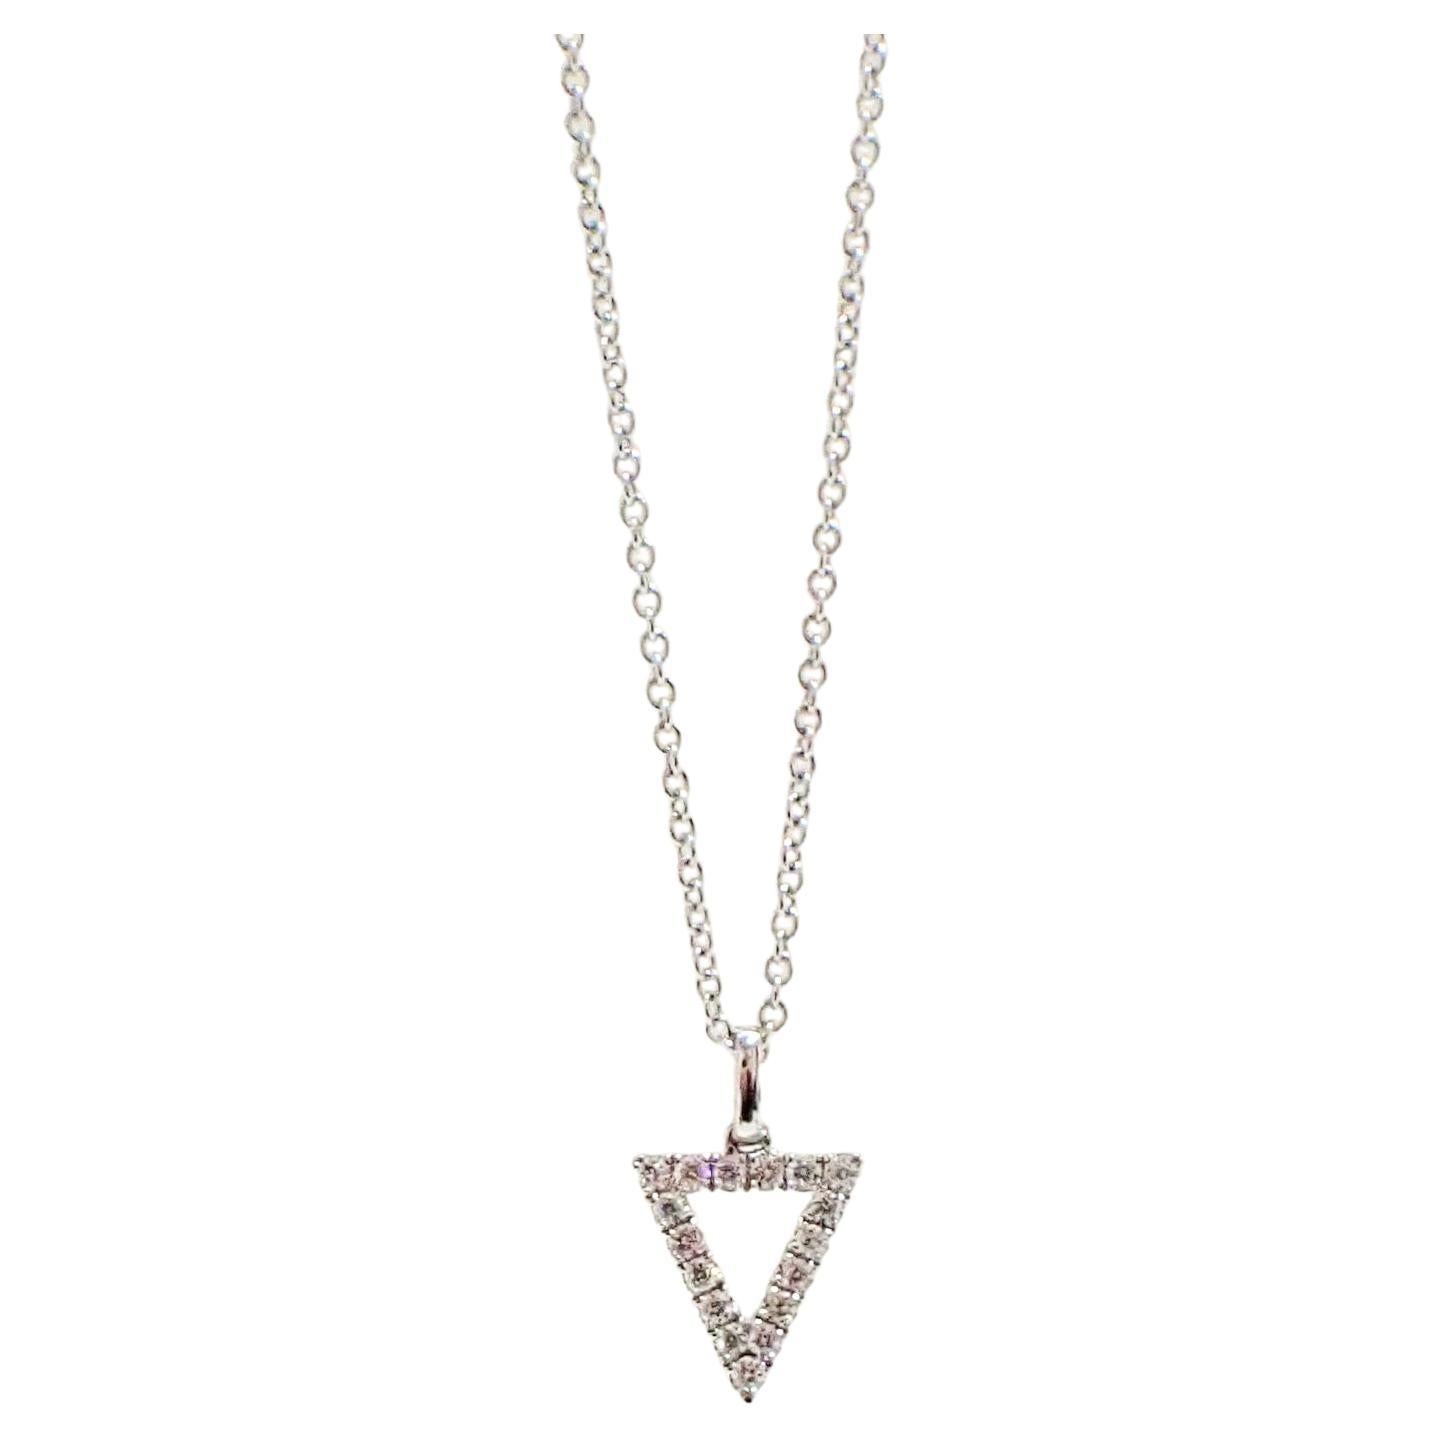 18k White Gold Triangle Pendant 0.15 Carat Diamond Hangs from a Cable Chain For Sale